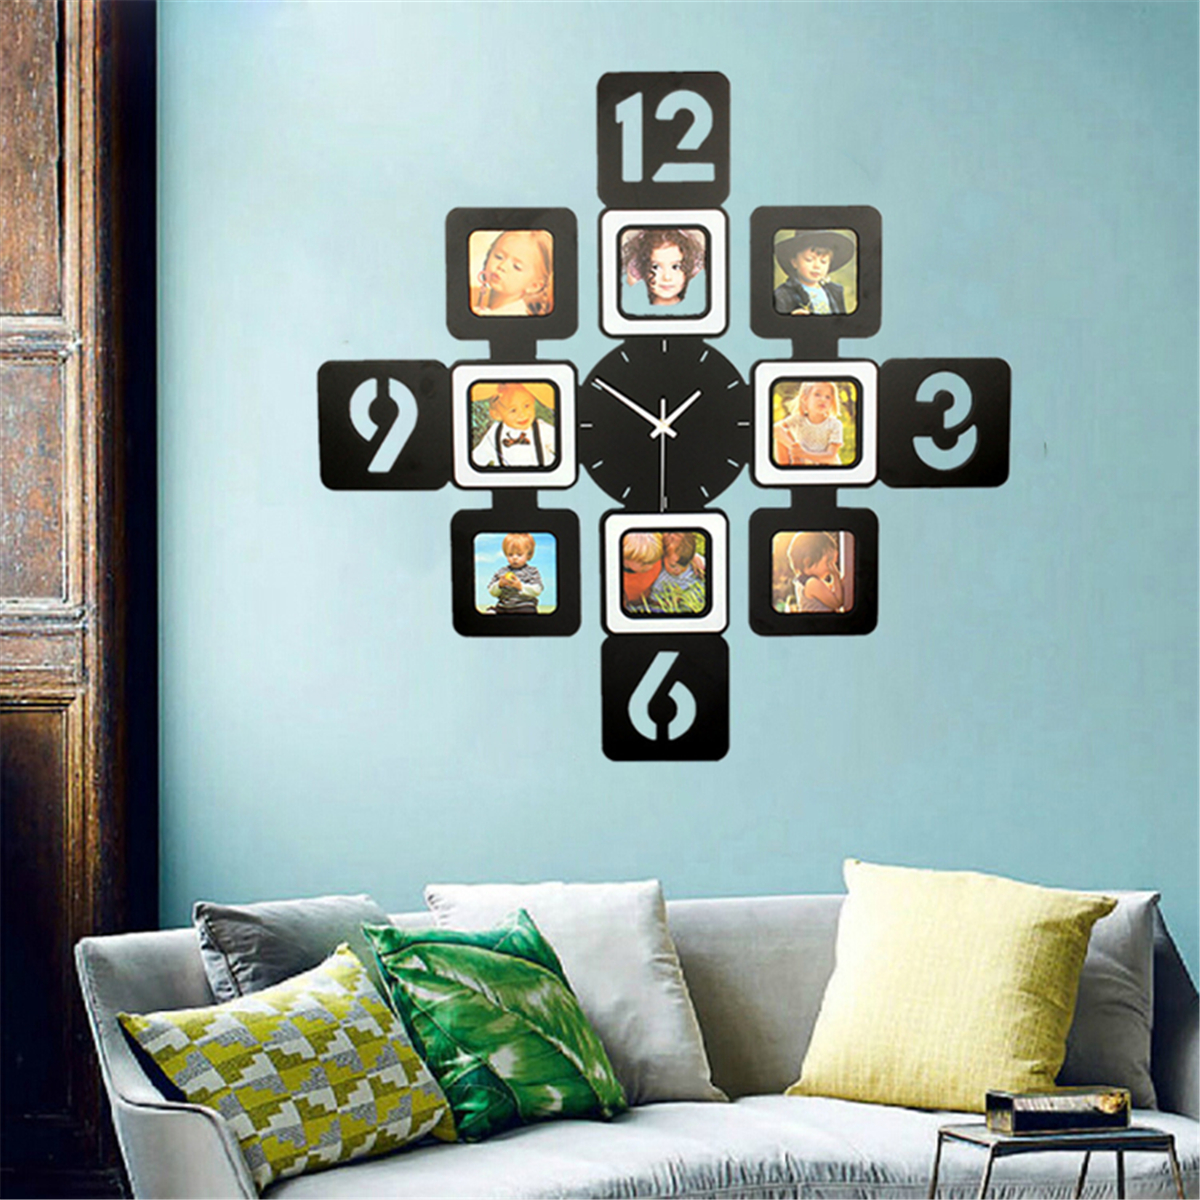 

70x70cm Living Room Bedroom Wall Clock Photo Frame Time Modern Trendy Latest Silent Big Christmas Gift Marriage Anniversary Present